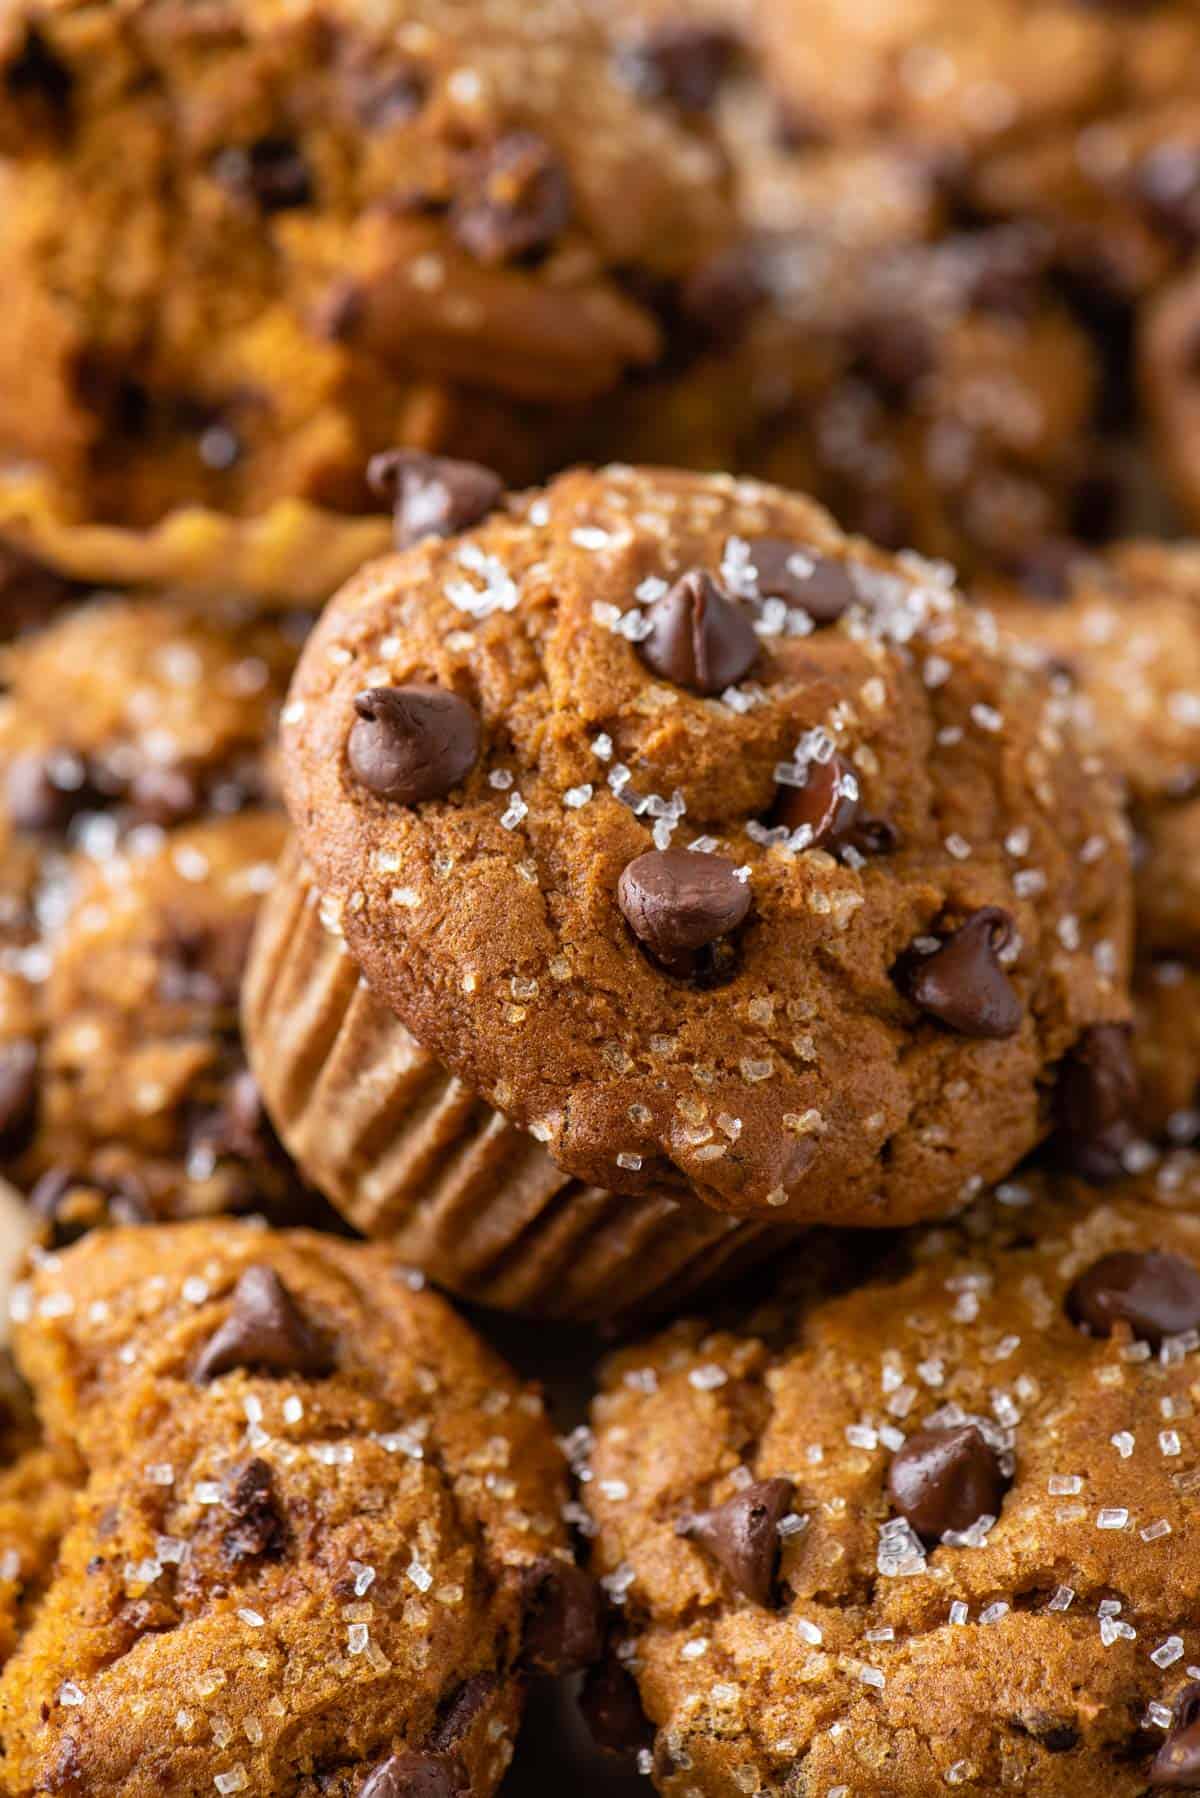 A perfectly baked pumpkin chocolate chip muffin sits surrounded by a stack of the same.